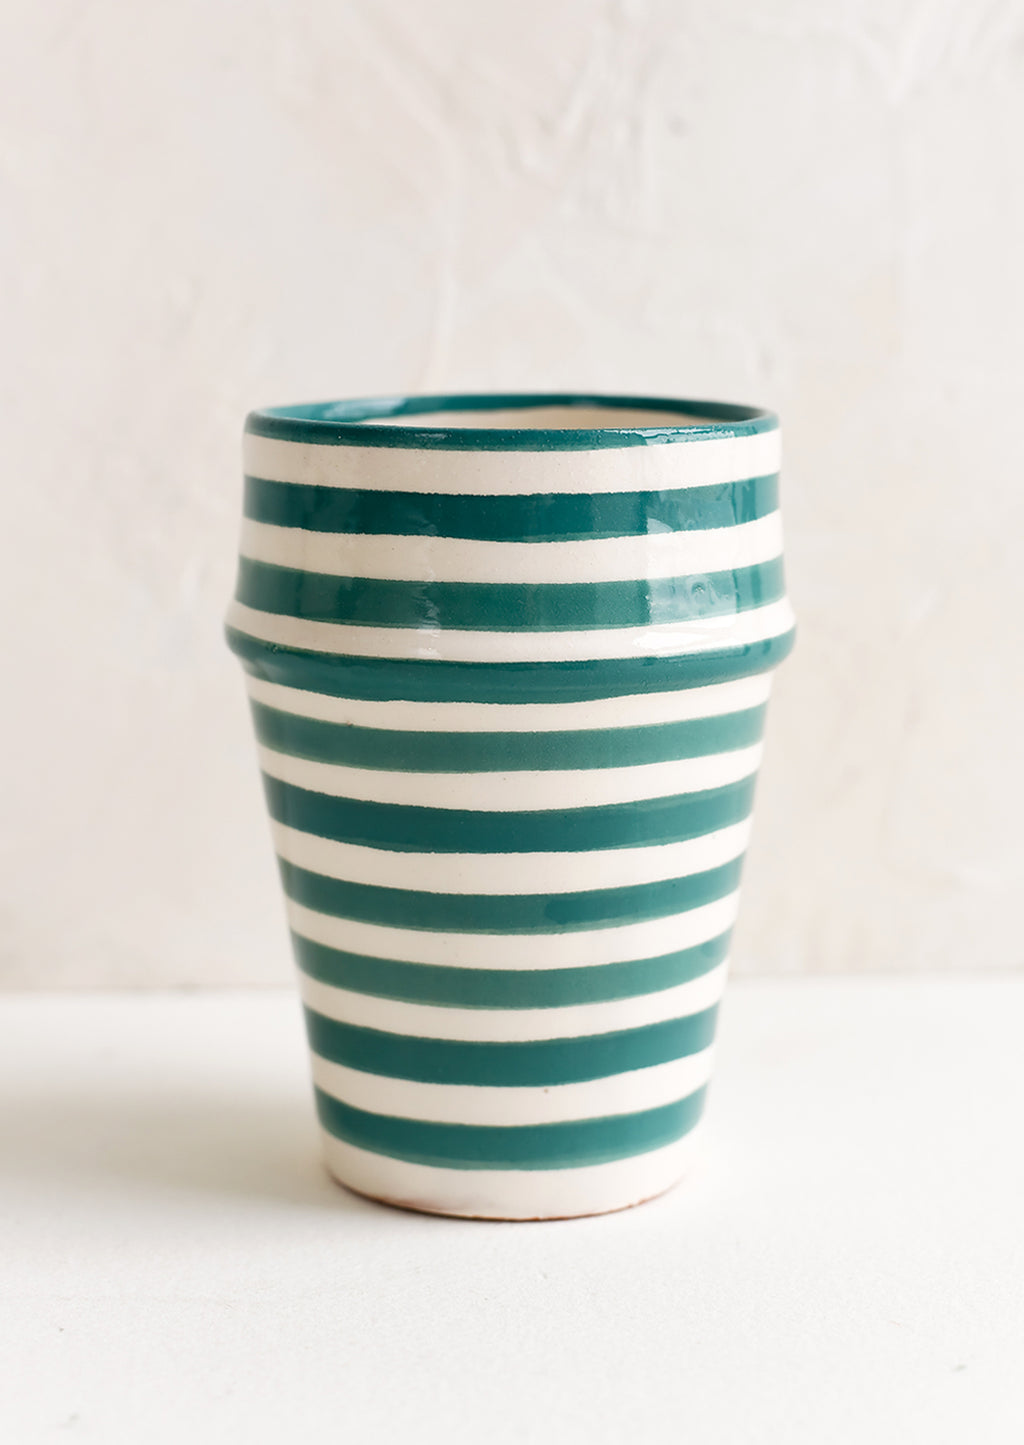 Teal: A moroccan style ceramic cup in teal and white stripes.